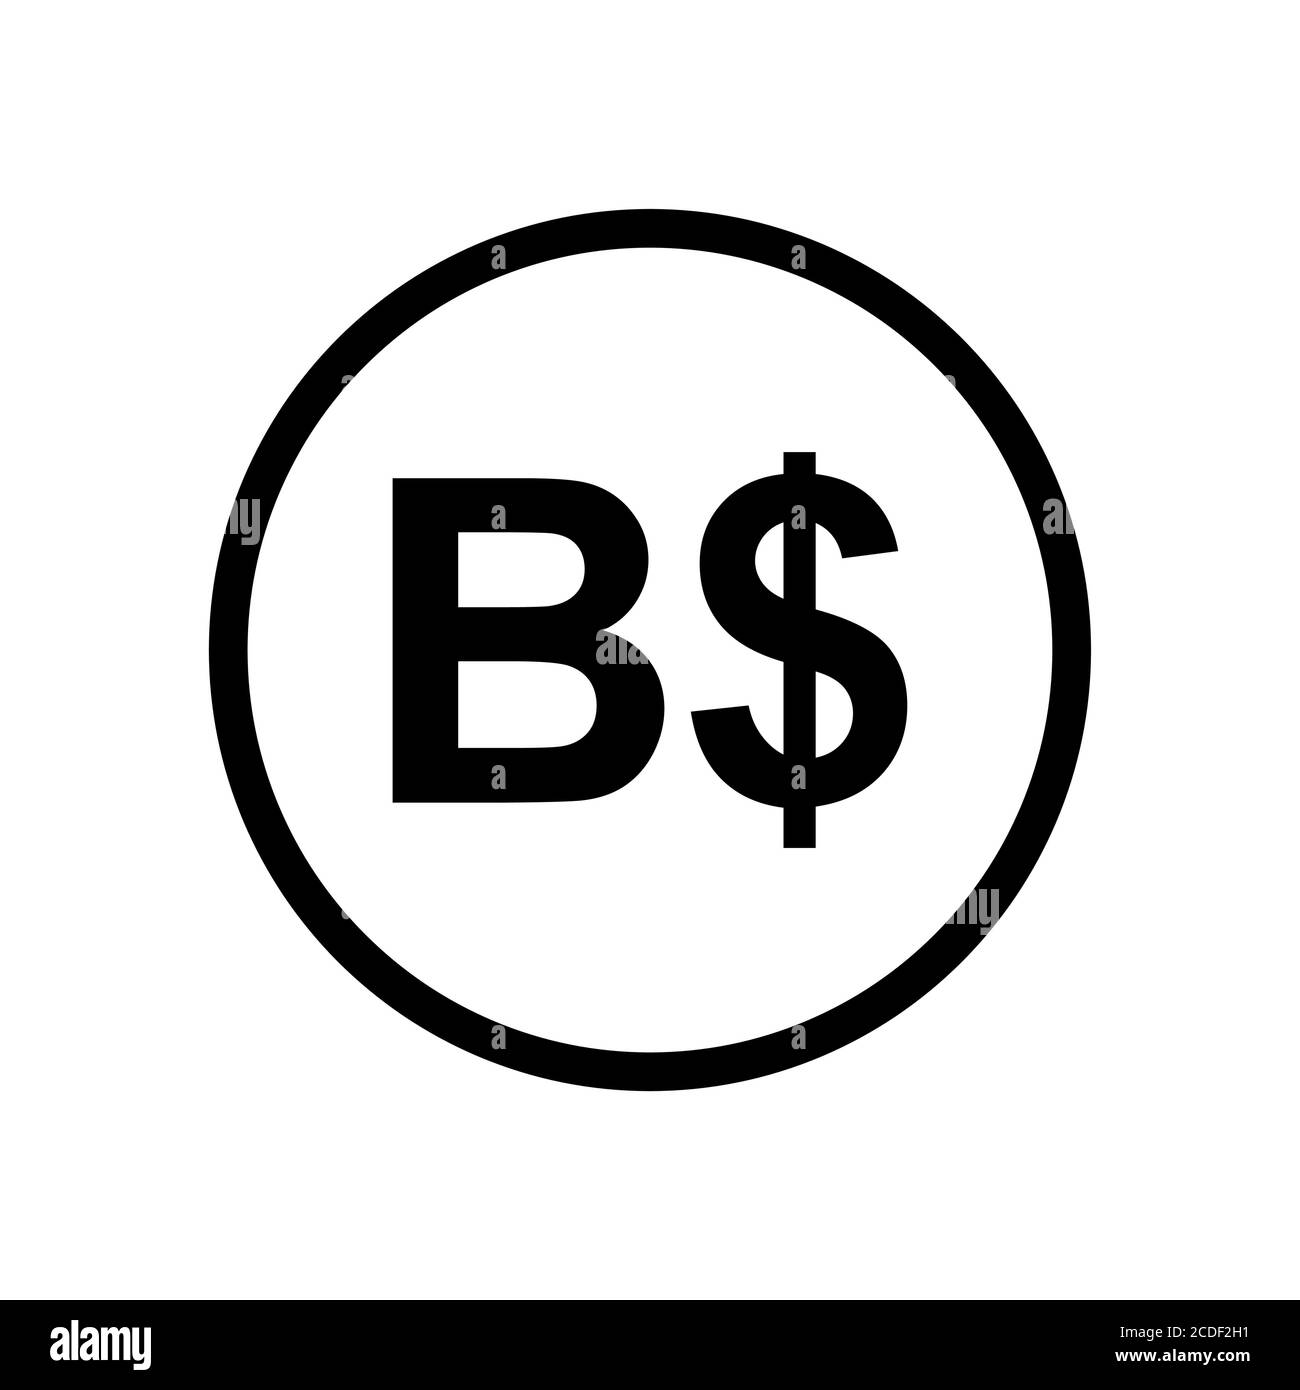 Bahamian dollar coin monochrome black and white icon. Current currency symbol. Stock Vector